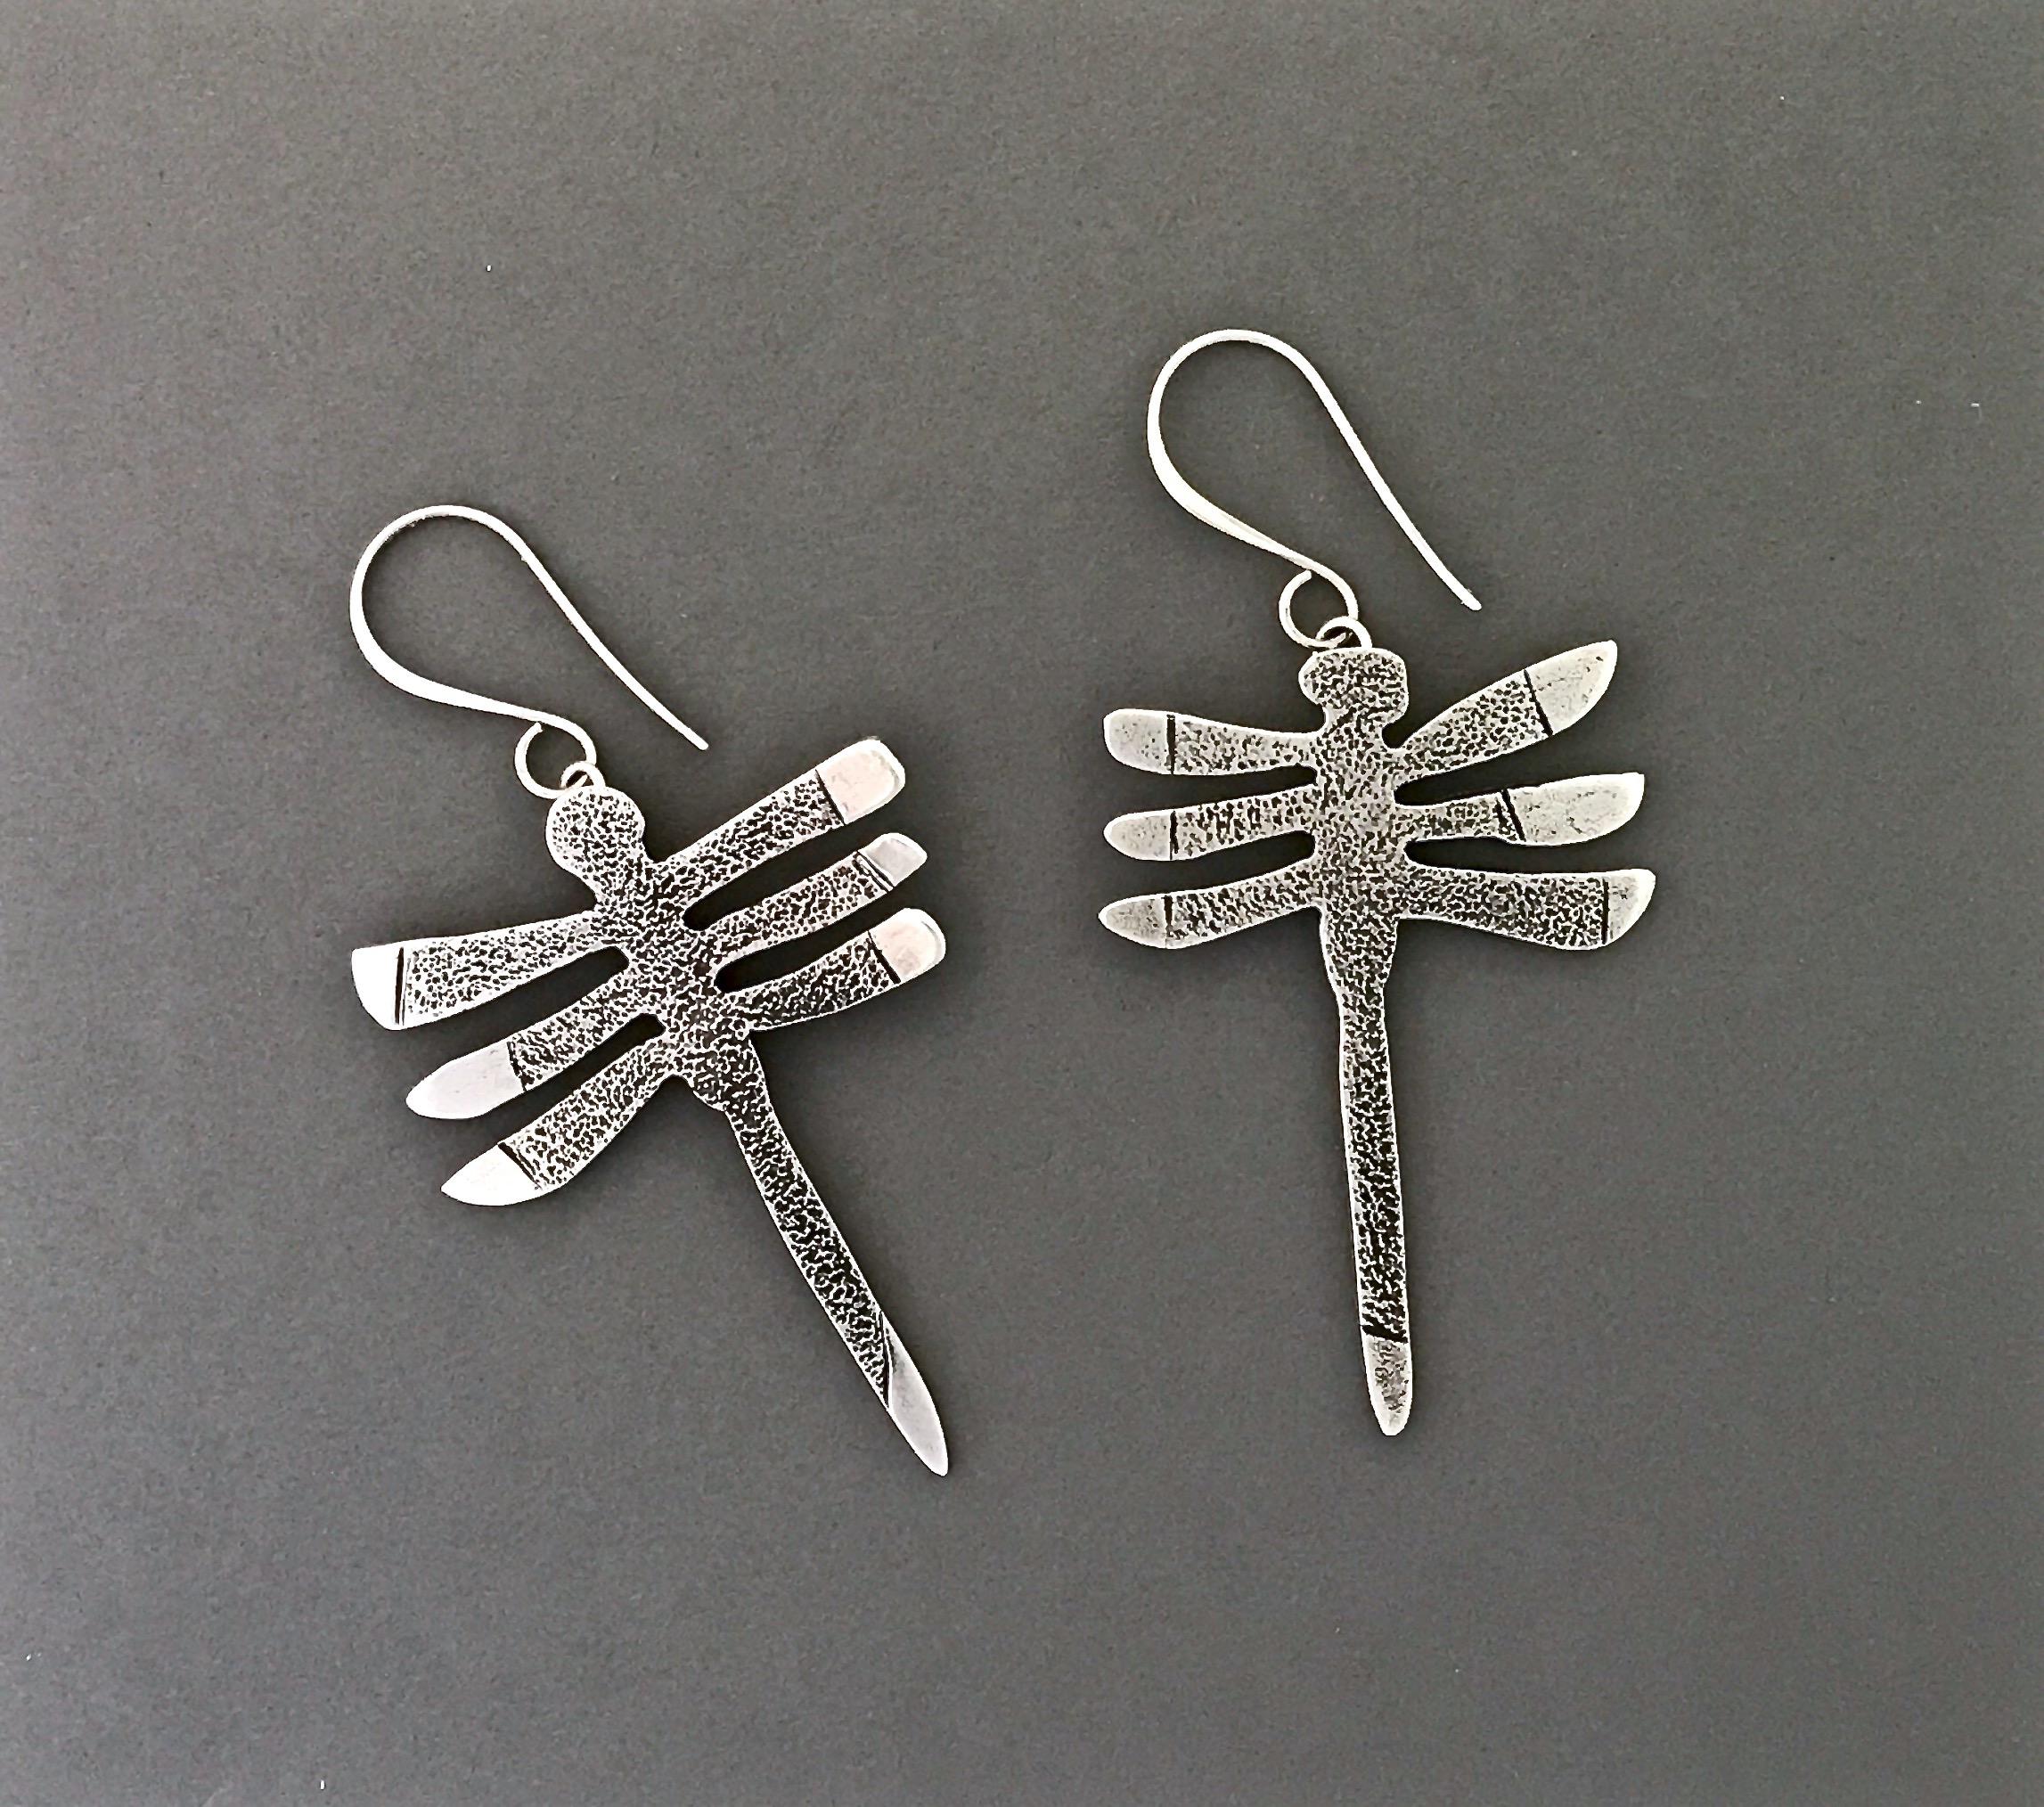 My Protectors, three-winged dragonfly earrings silver Navajo Melanie Yazzie

Melanie A. Yazzie (Navajo-Diné) is a highly regarded multimedia artist known for her printmaking, paintings, sculpture, and jewelry designs.

She has exhibited, lectured,